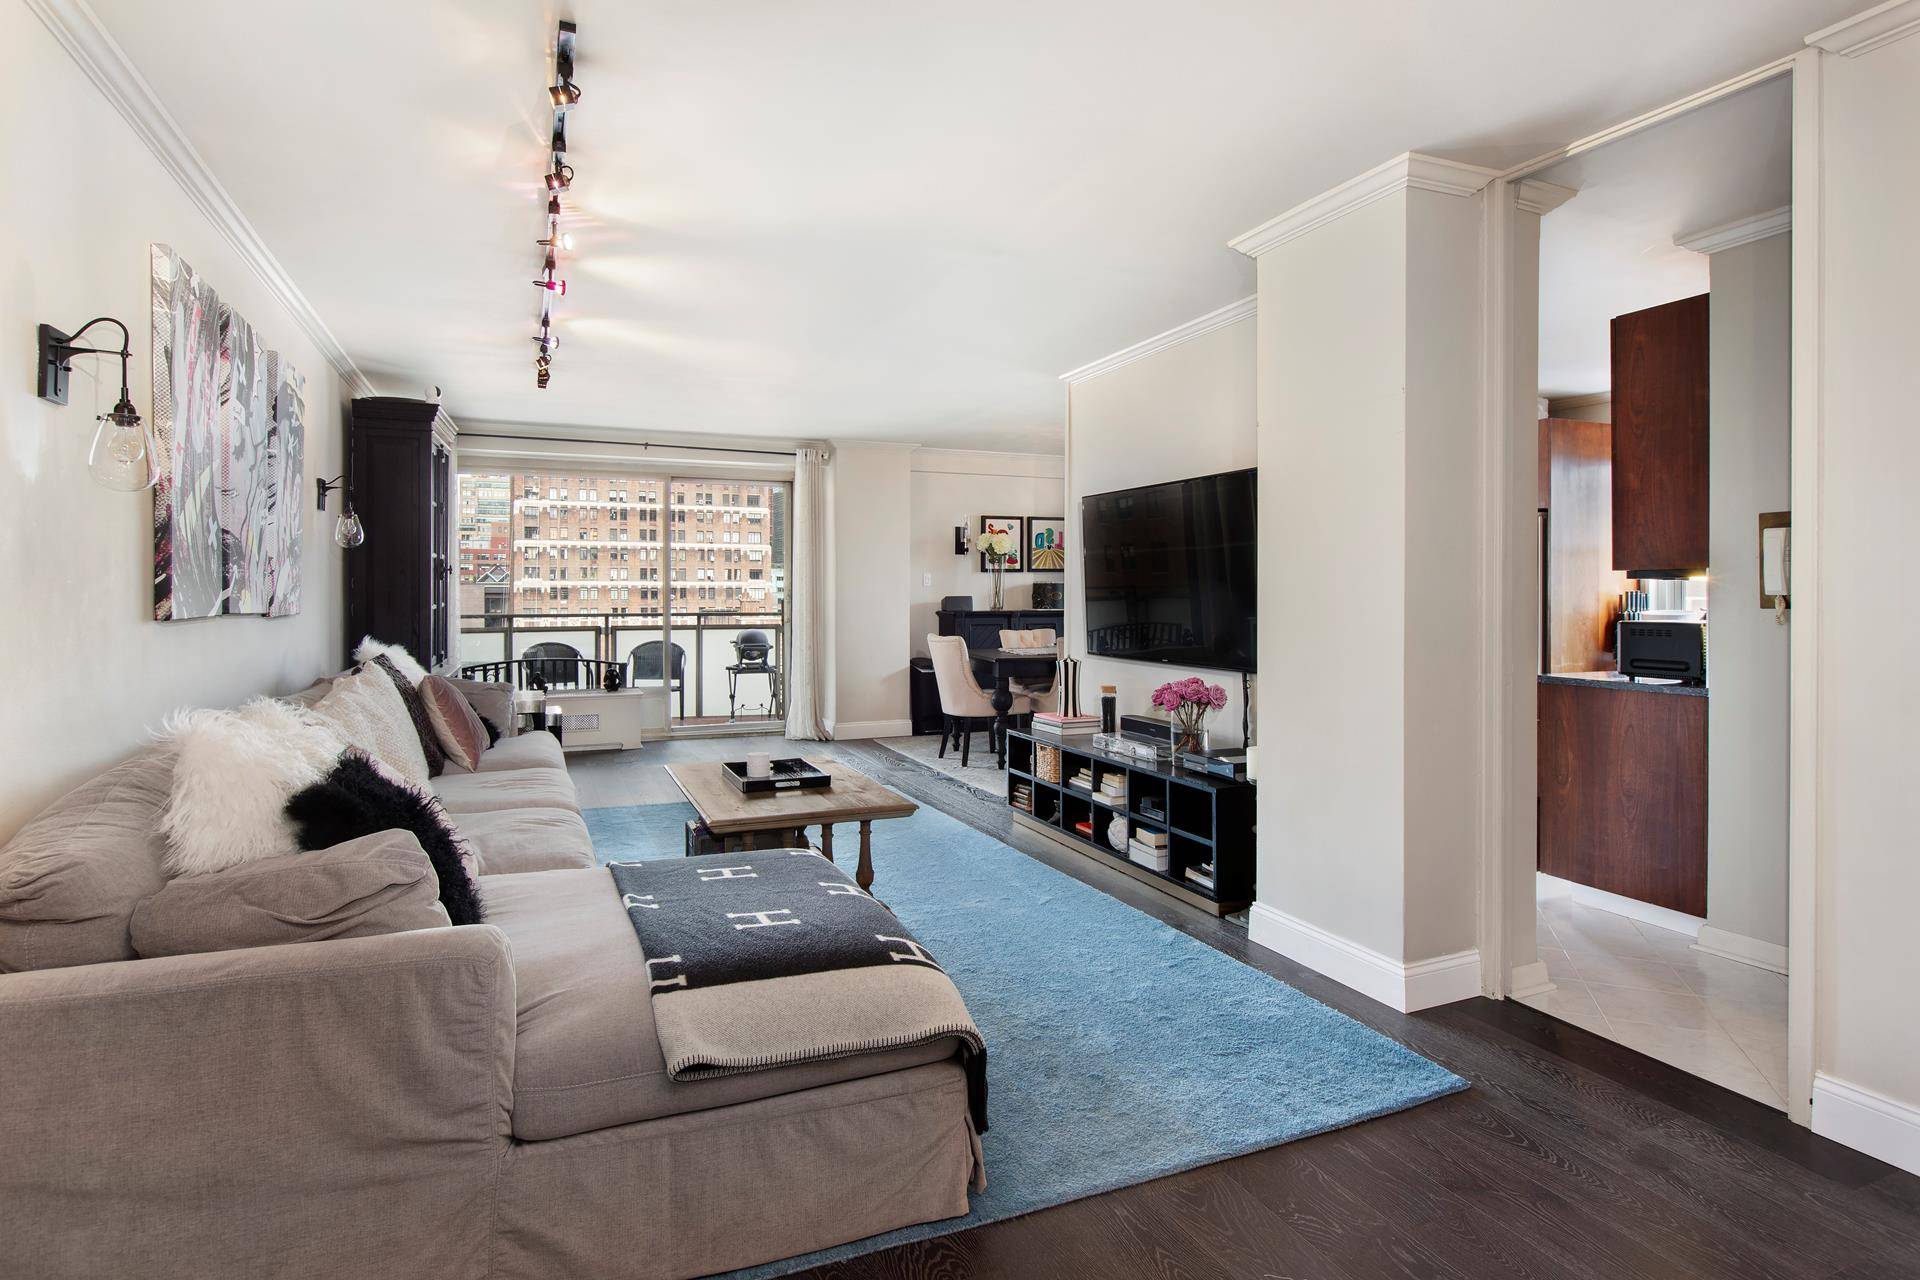 With many spaces for convenient home office, this loft like, super sized convertible to 4 four bedroom combo apartment with spectacular master bedroom suite has more than you expected !